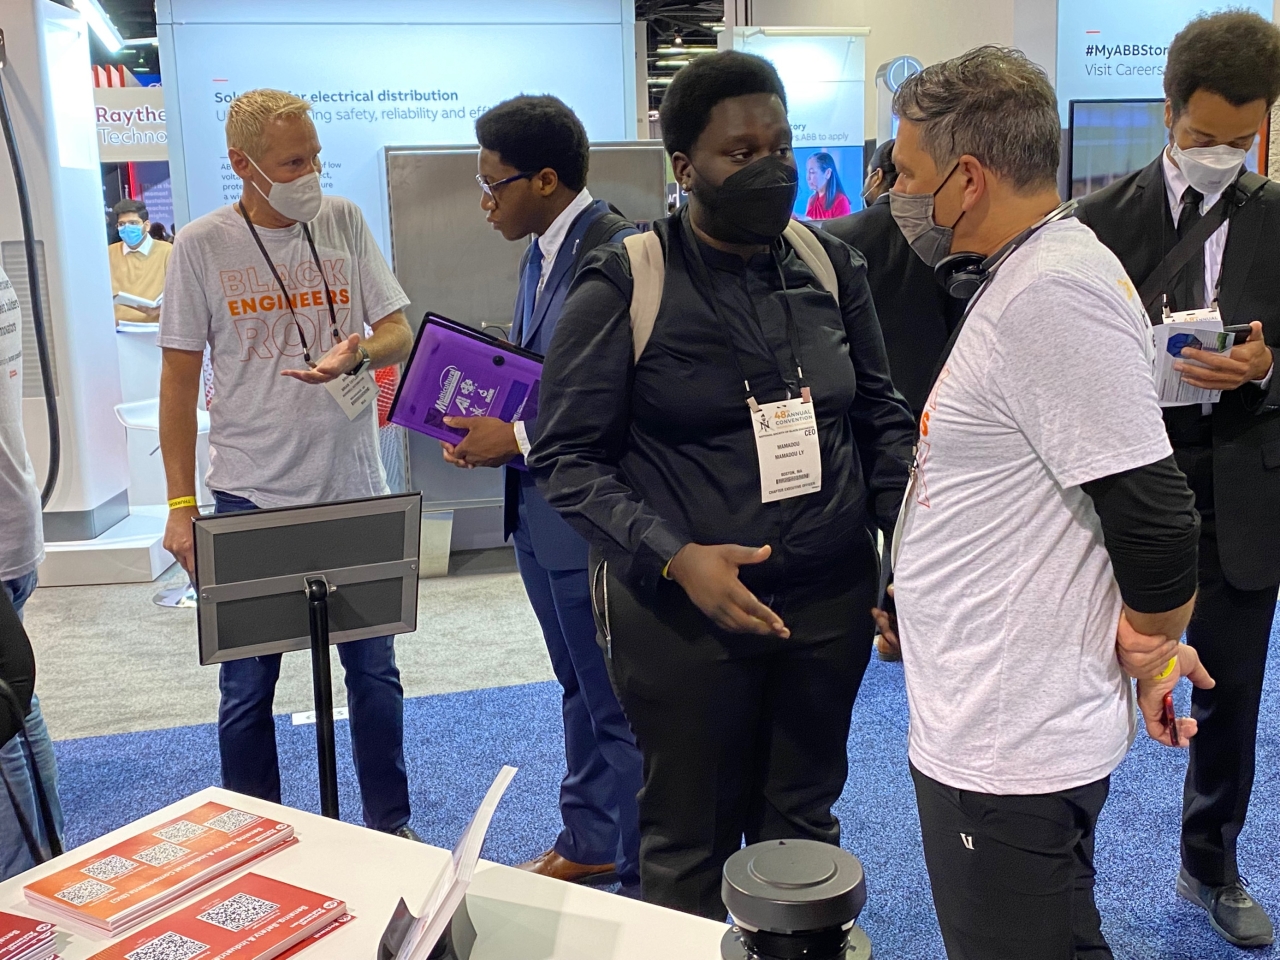 Rockwell’s Brian Taylor (far left) and Chris Nardecchia (far right), senior vice president and Chief Information and Digital Officer, meet with NSBE attendees.